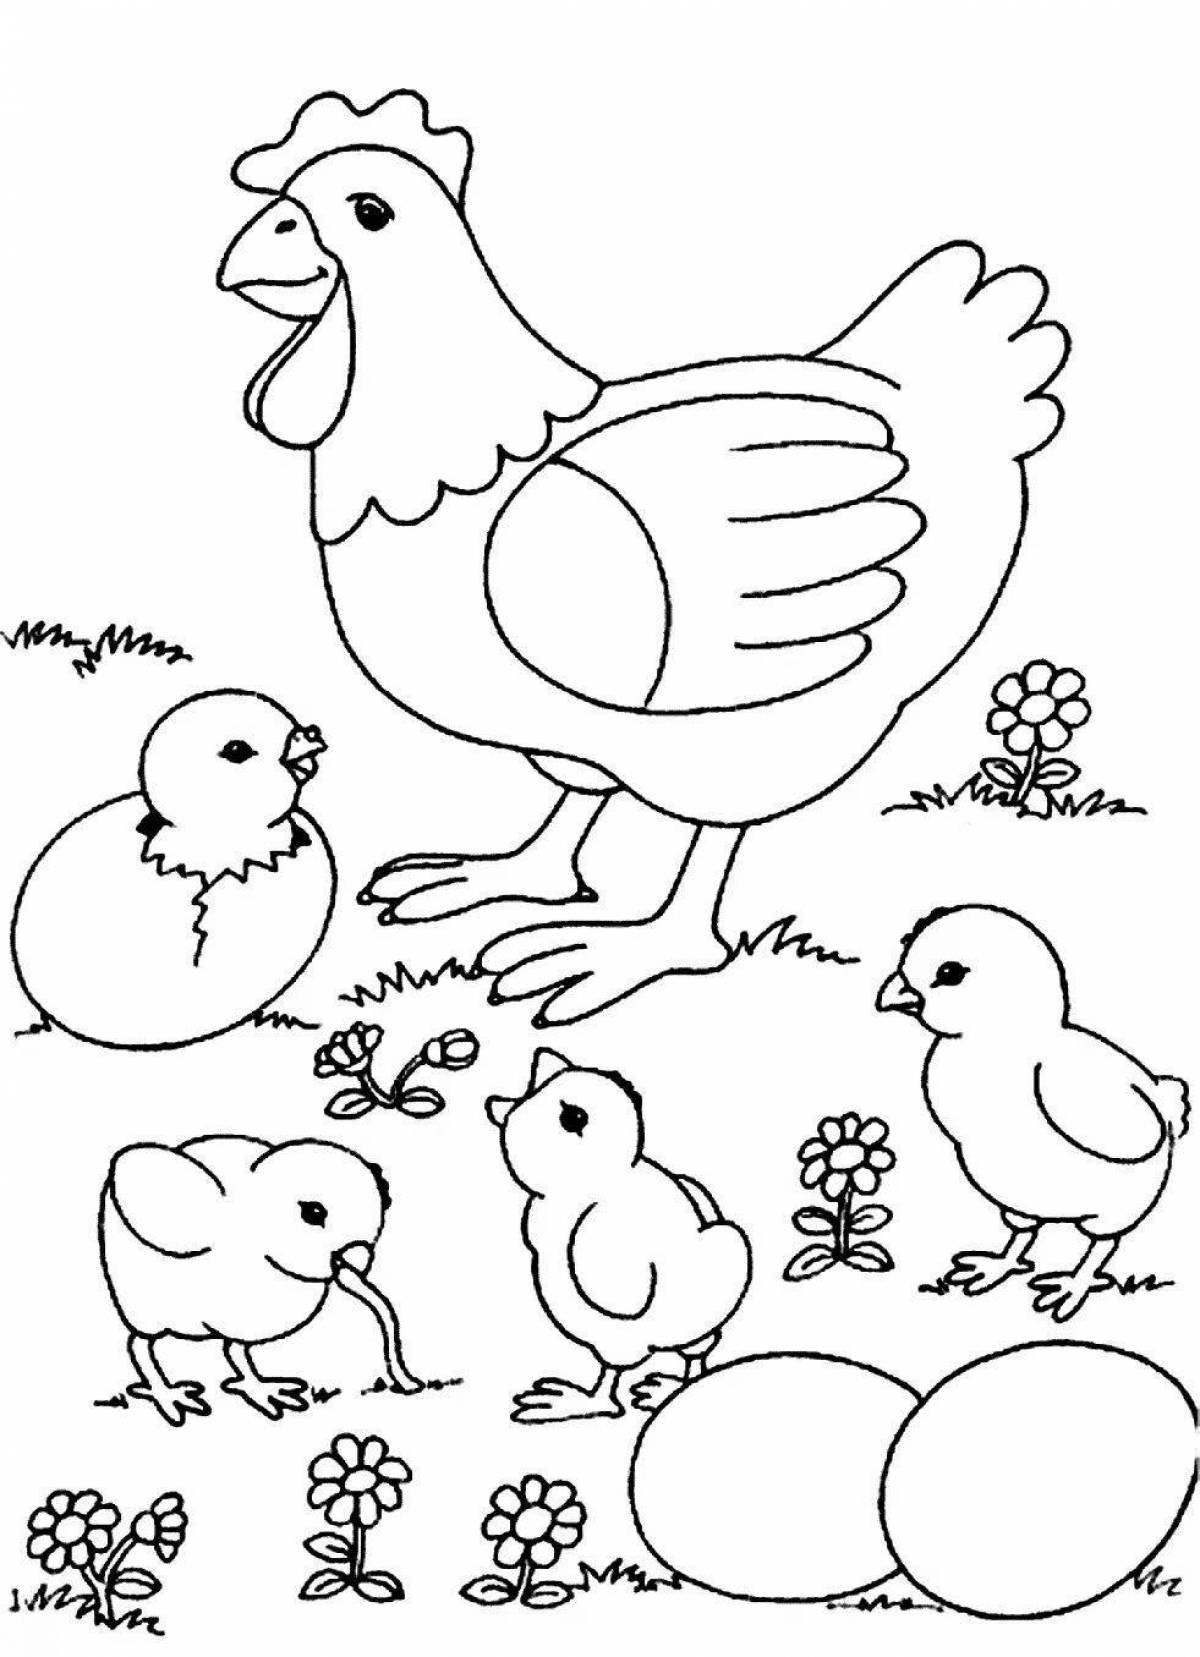 Adorable chick coloring book for 4-5 year olds